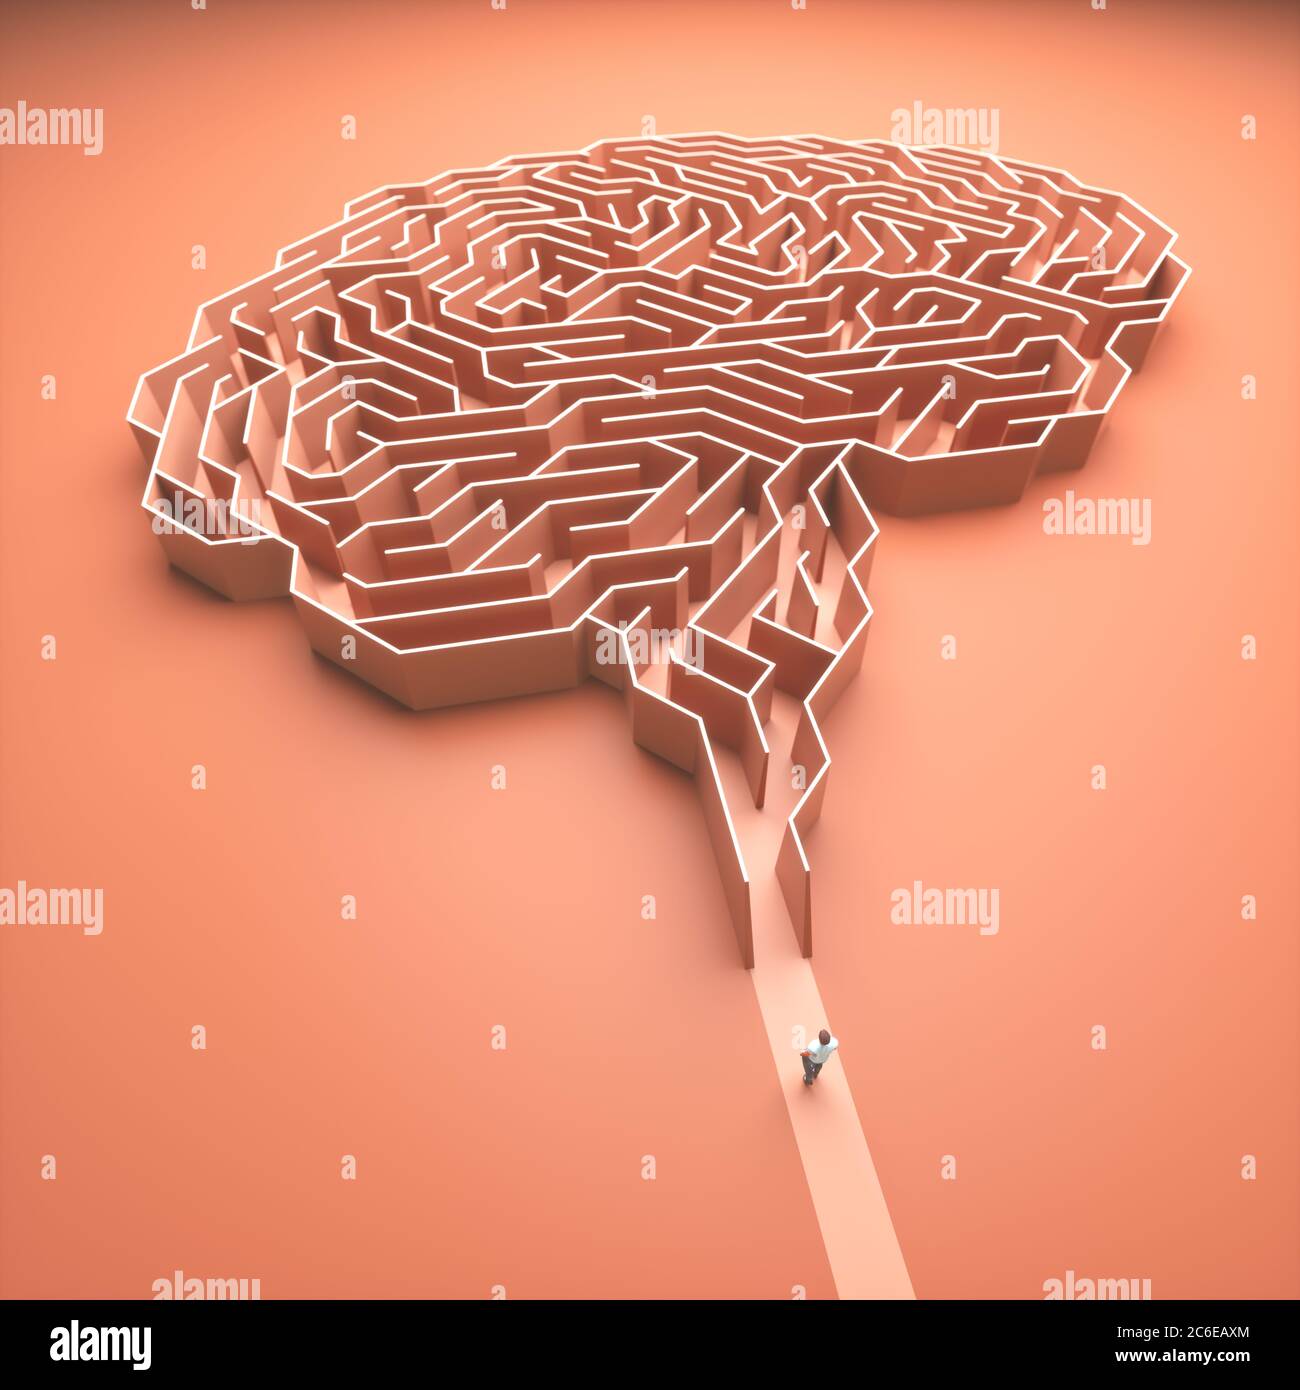 Brain shaped maze. Conceptual image of science and medicine. 3D illustration. Stock Photo